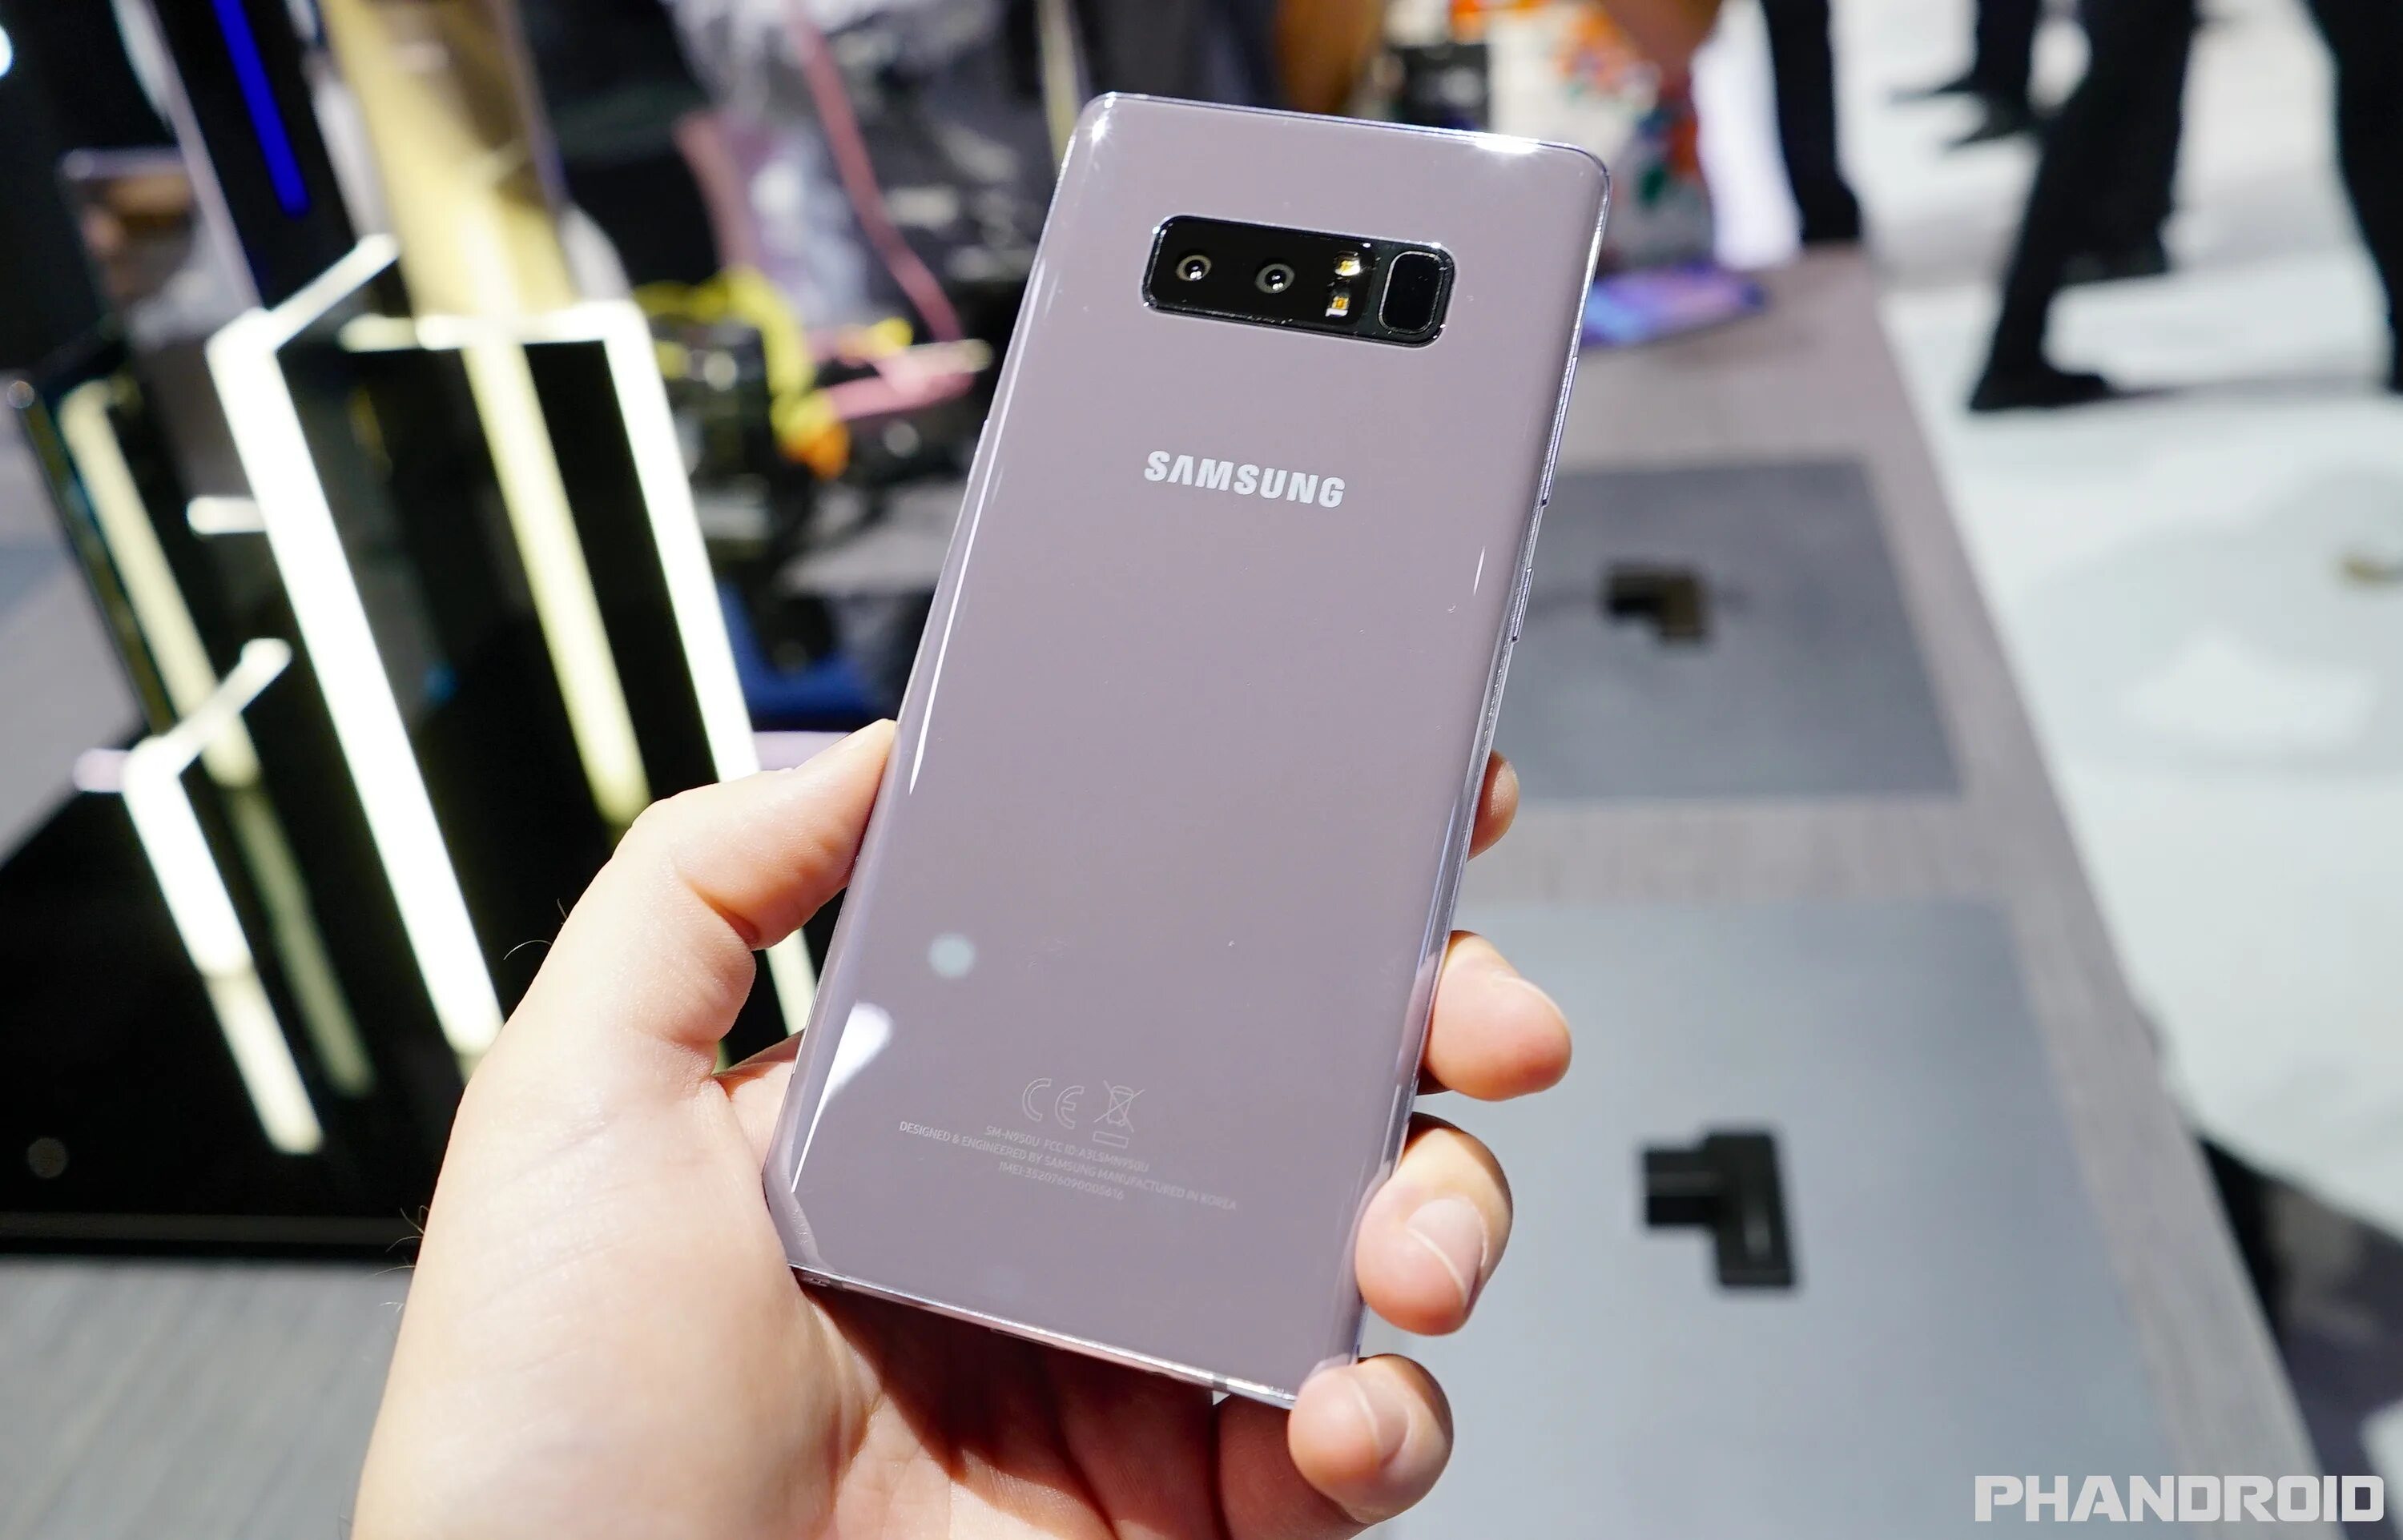 Note 8 звук. Samsung Galaxy Note 8. Samsung Galaxy Note 8 Plus. Samsung Galaxy Note 8 Black. Самсунг гелакси Нотте 8.